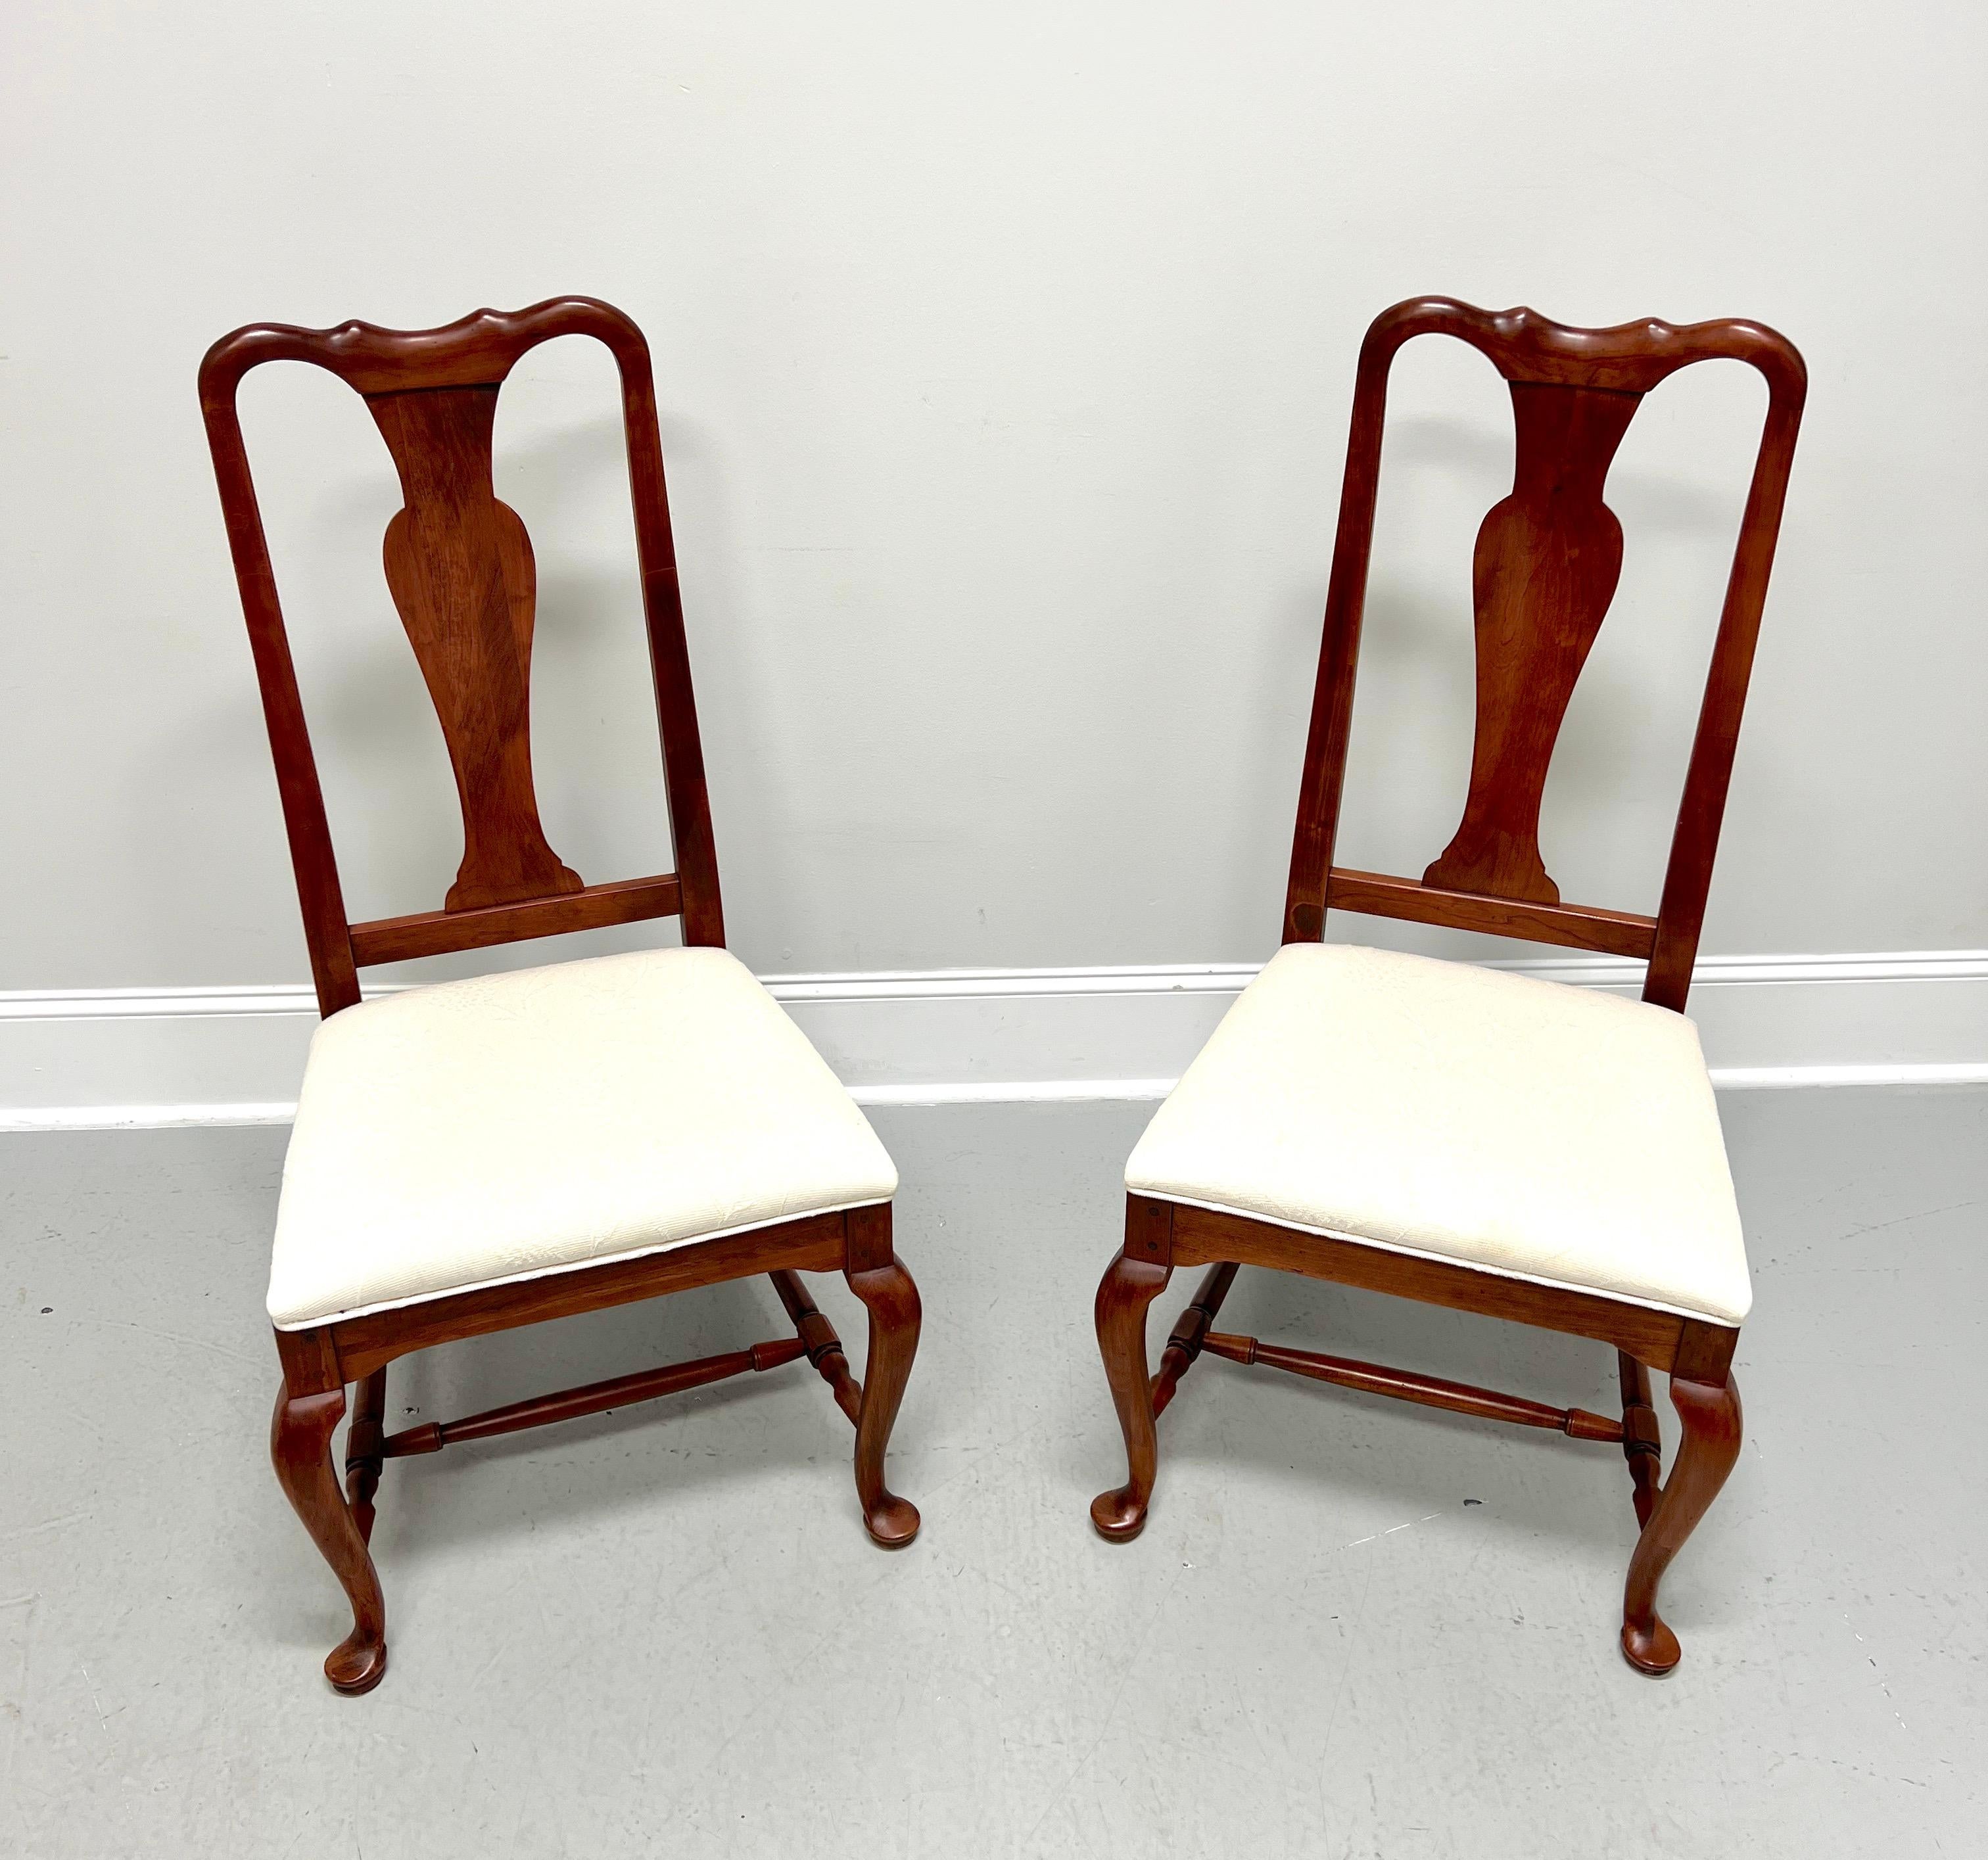 A pair of Queen Anne style dining side chairs by Lexington Furniture, from their Bob Timberlake Collection. Solid cherry wood, carved crest rail & center backrest, upholstered seat in a neutral off-white fabric, carved apron at legs, turned